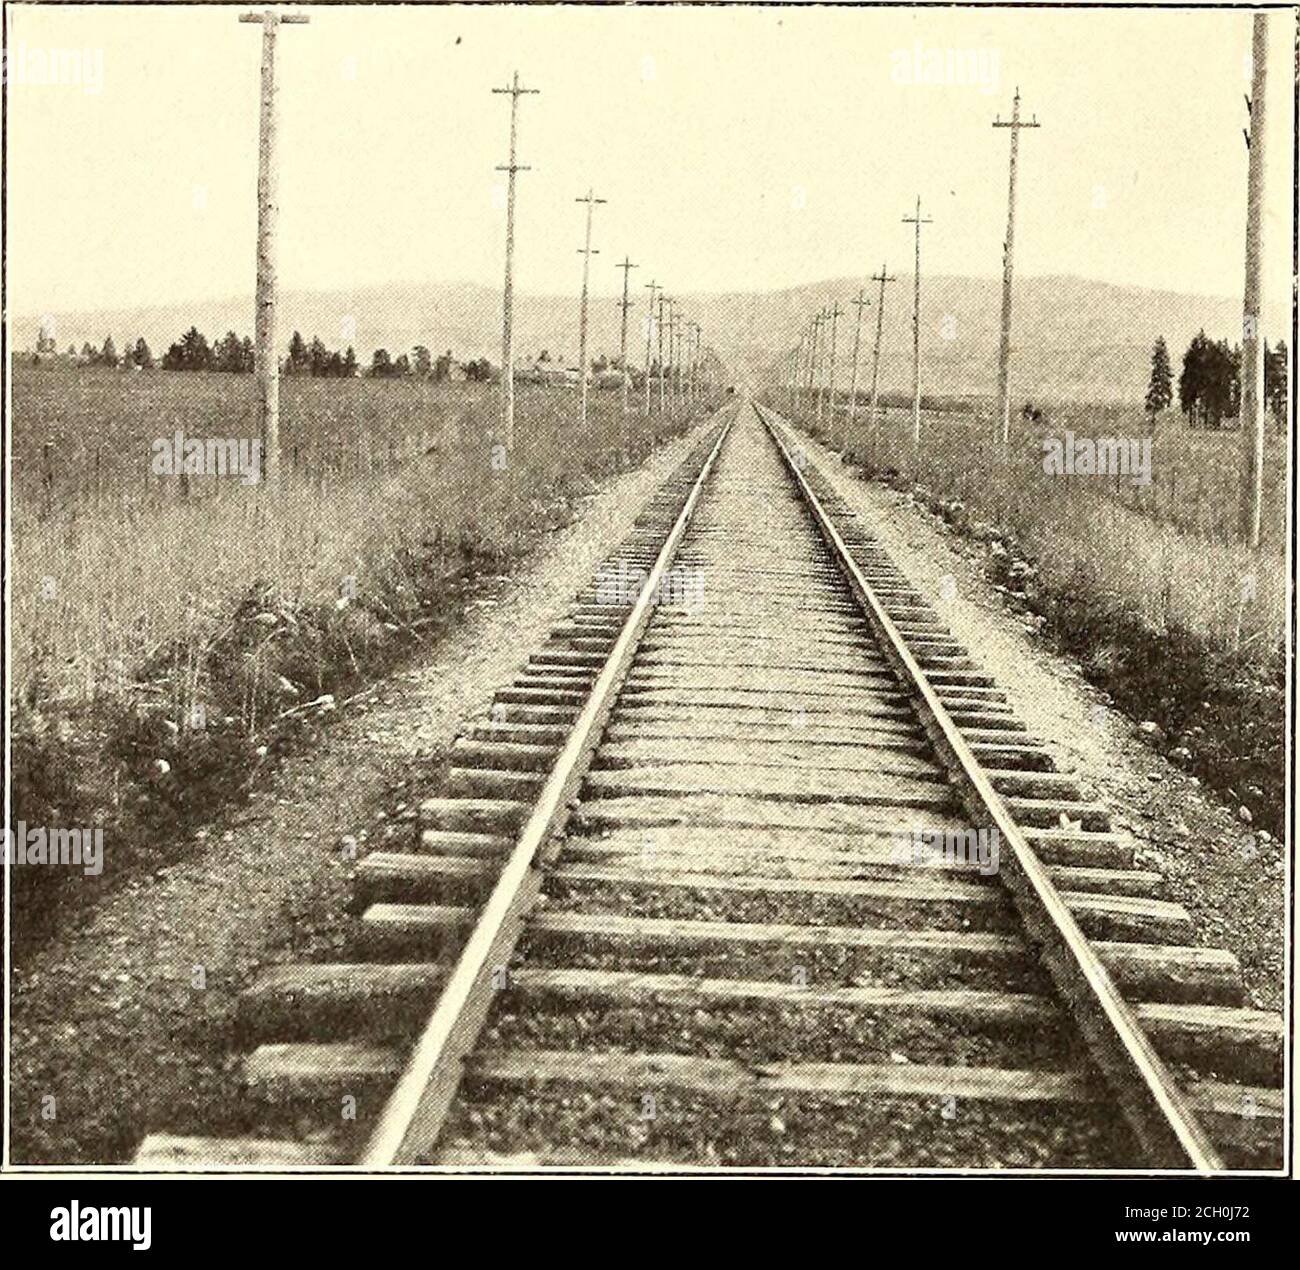 . The Street railway journal . lene. It is the chief shippingpoint of the Coeur dAlene mines, with boats running to all As shown on the accompanying map, the railway follows thevalley of the Spokane River, which is the natural outlet of LakeCoeur dAlene. About midway between the termini, the roadcrosses the river, 2&gt;7lA ft- above the surface of the water, on a600-ft. wooden truss bridge, and at the same time also crossesthe dividing line between the States of Idaho and Washington.The track is of standard gage and is laid with 60-lb. standardA. S. C. E. section T-rail in 30-ft. lengths. The Stock Photo